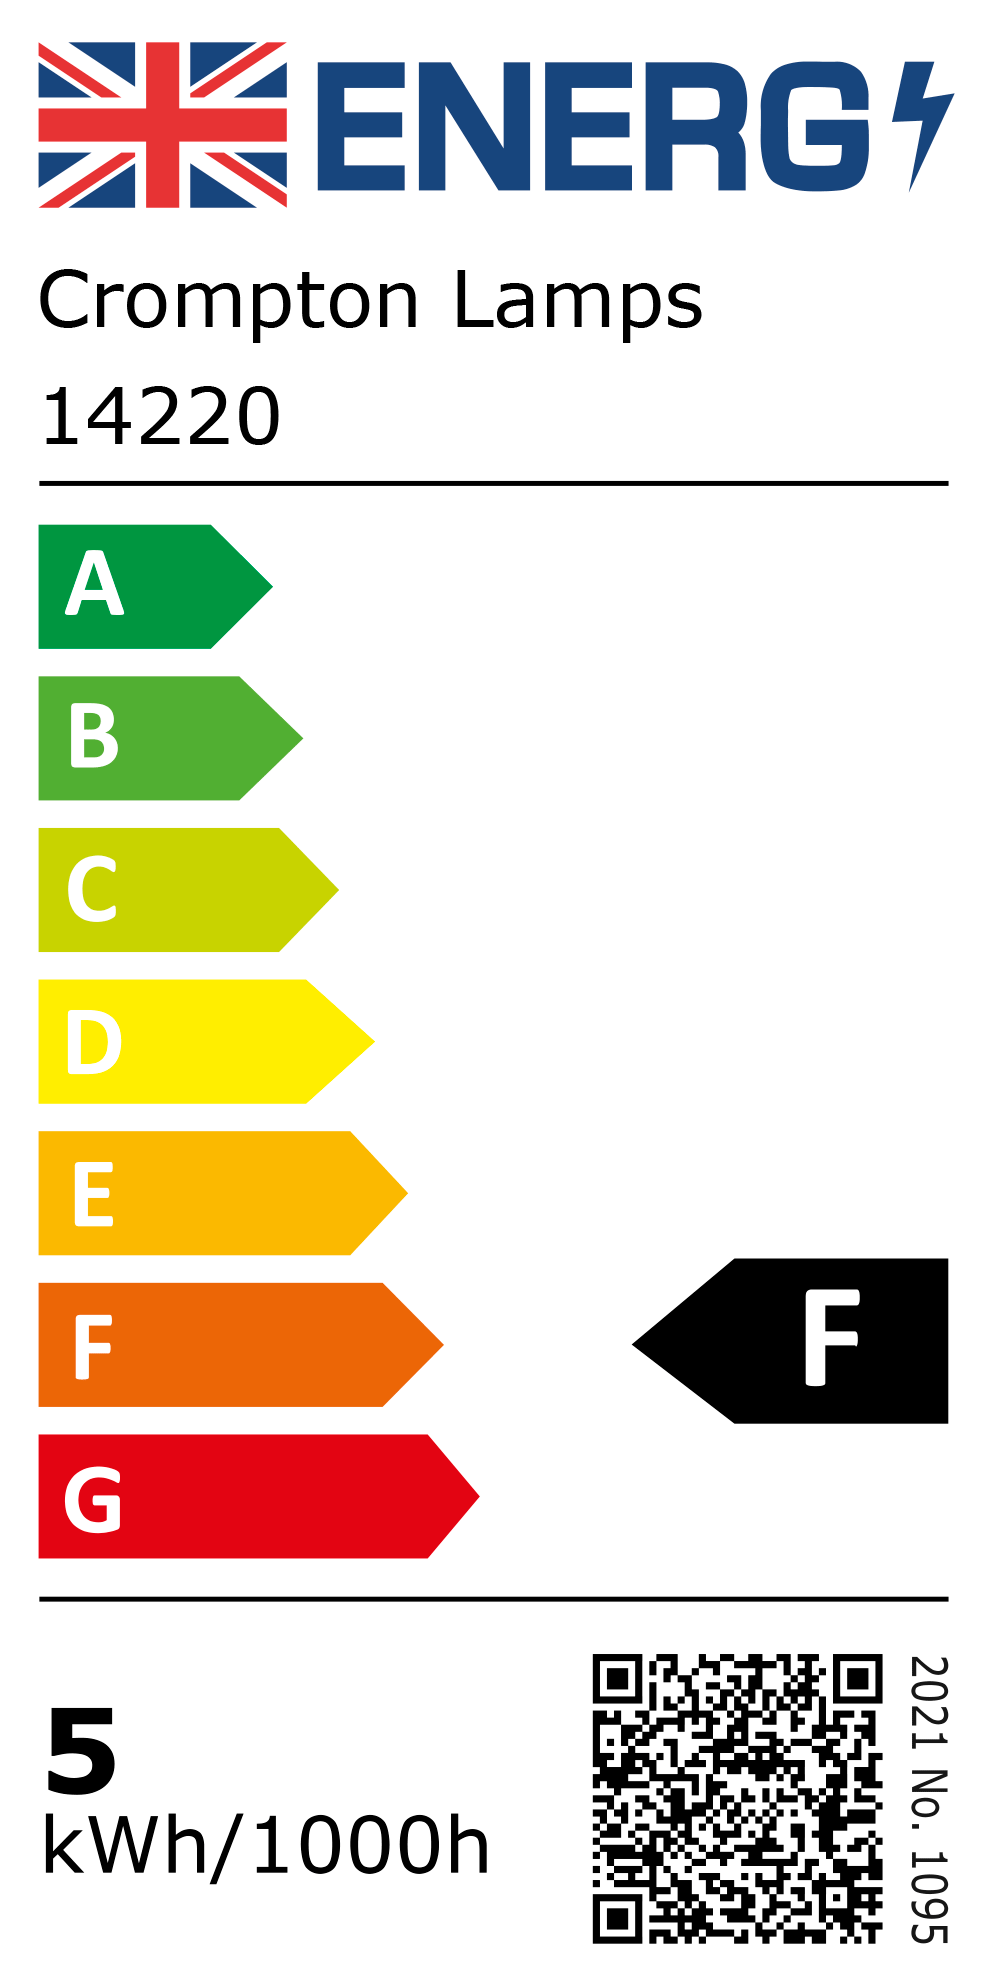 New 2021 Energy Rating Label: Stock Code 14220